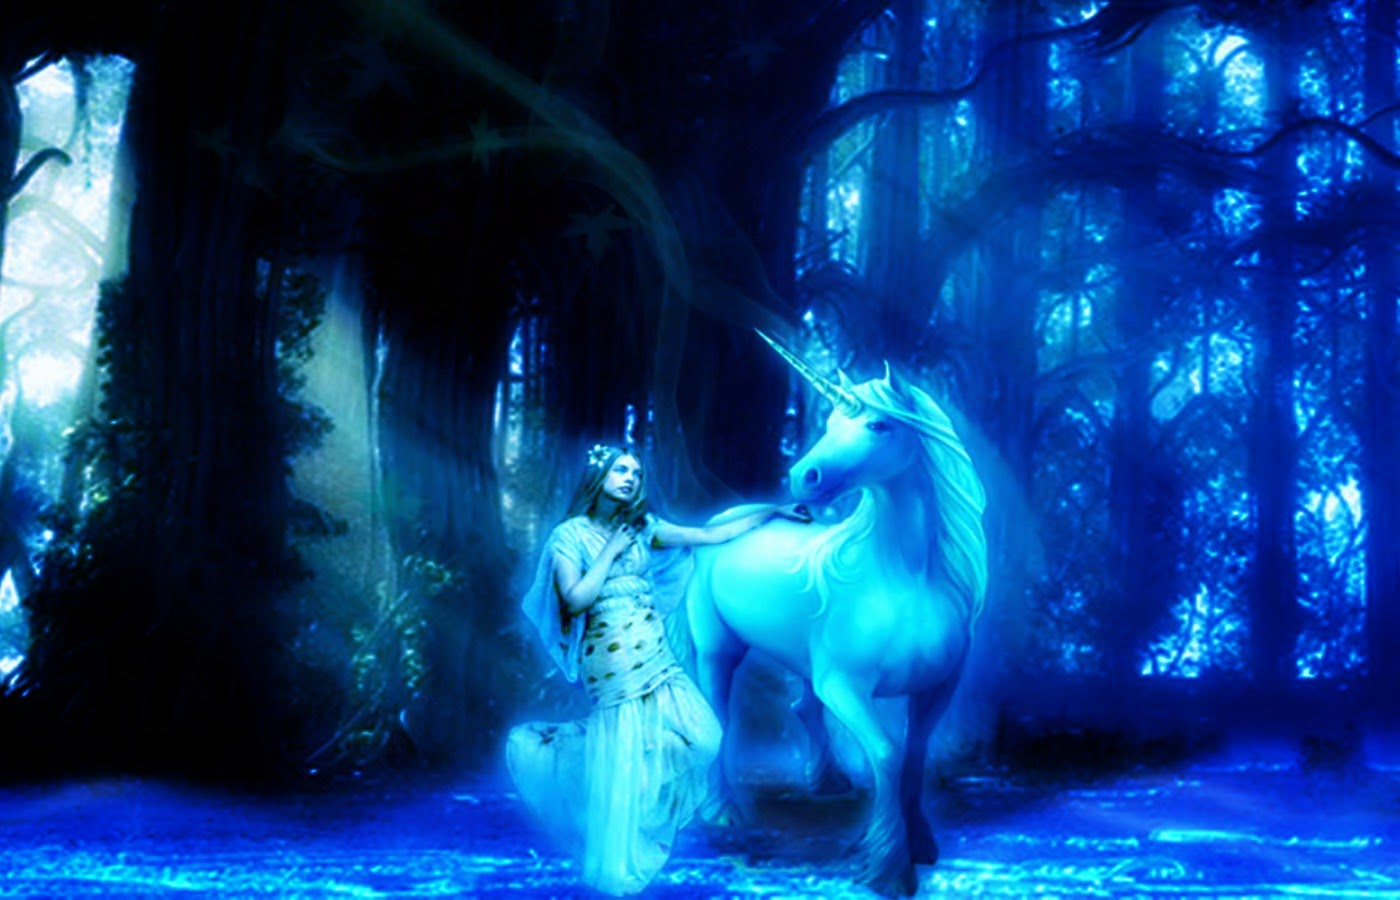 Princess with unicorn horse fairy tale story images for